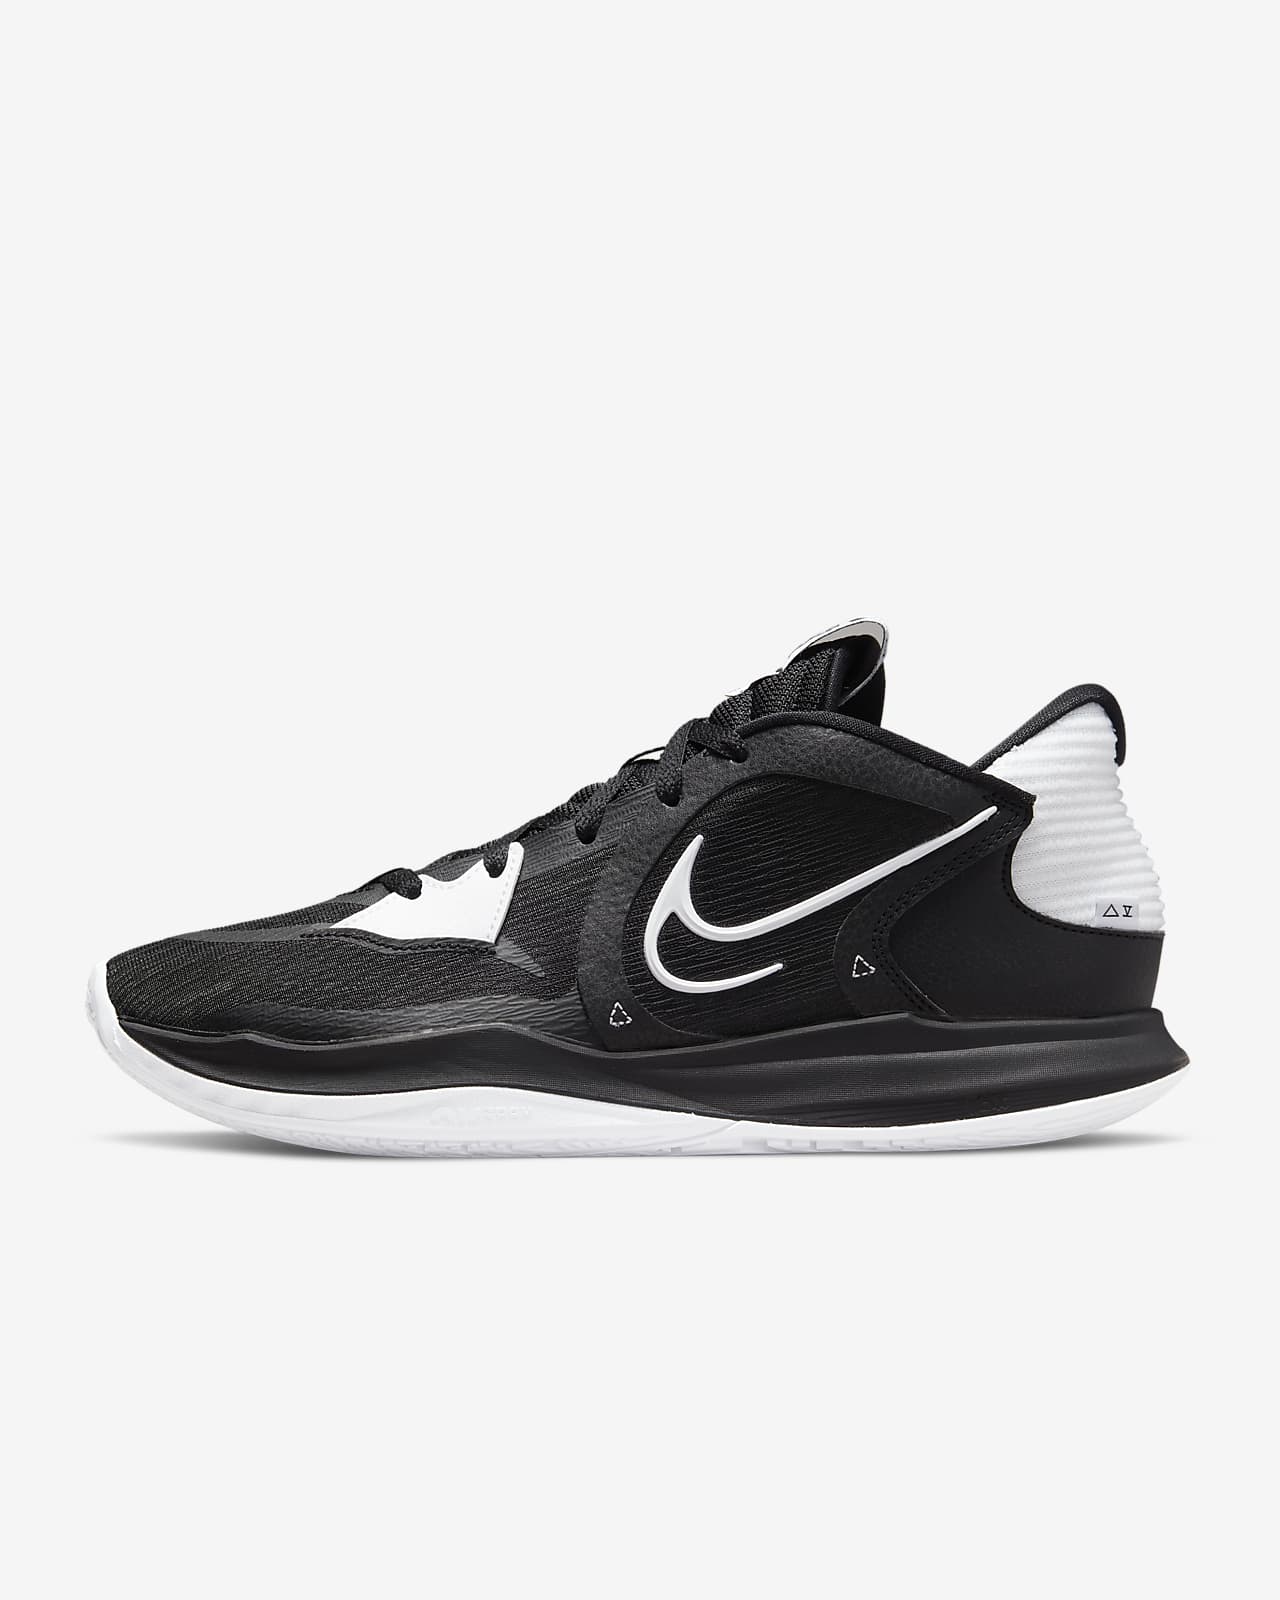 Kyrie Low 5 (Team) Basketball Shoes